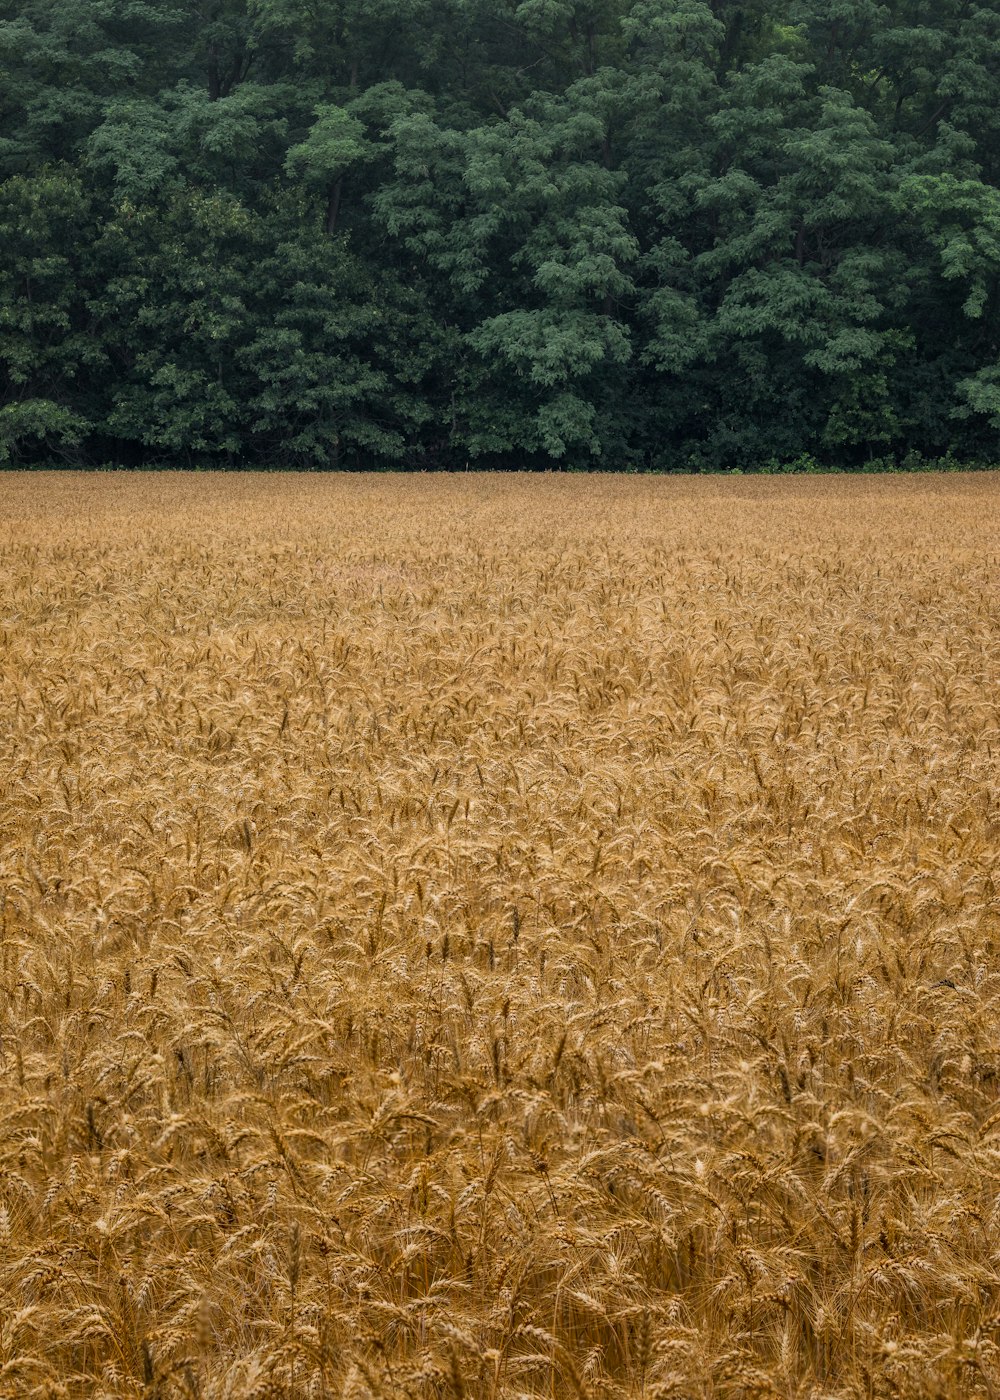 a field of brown grass with trees in the background